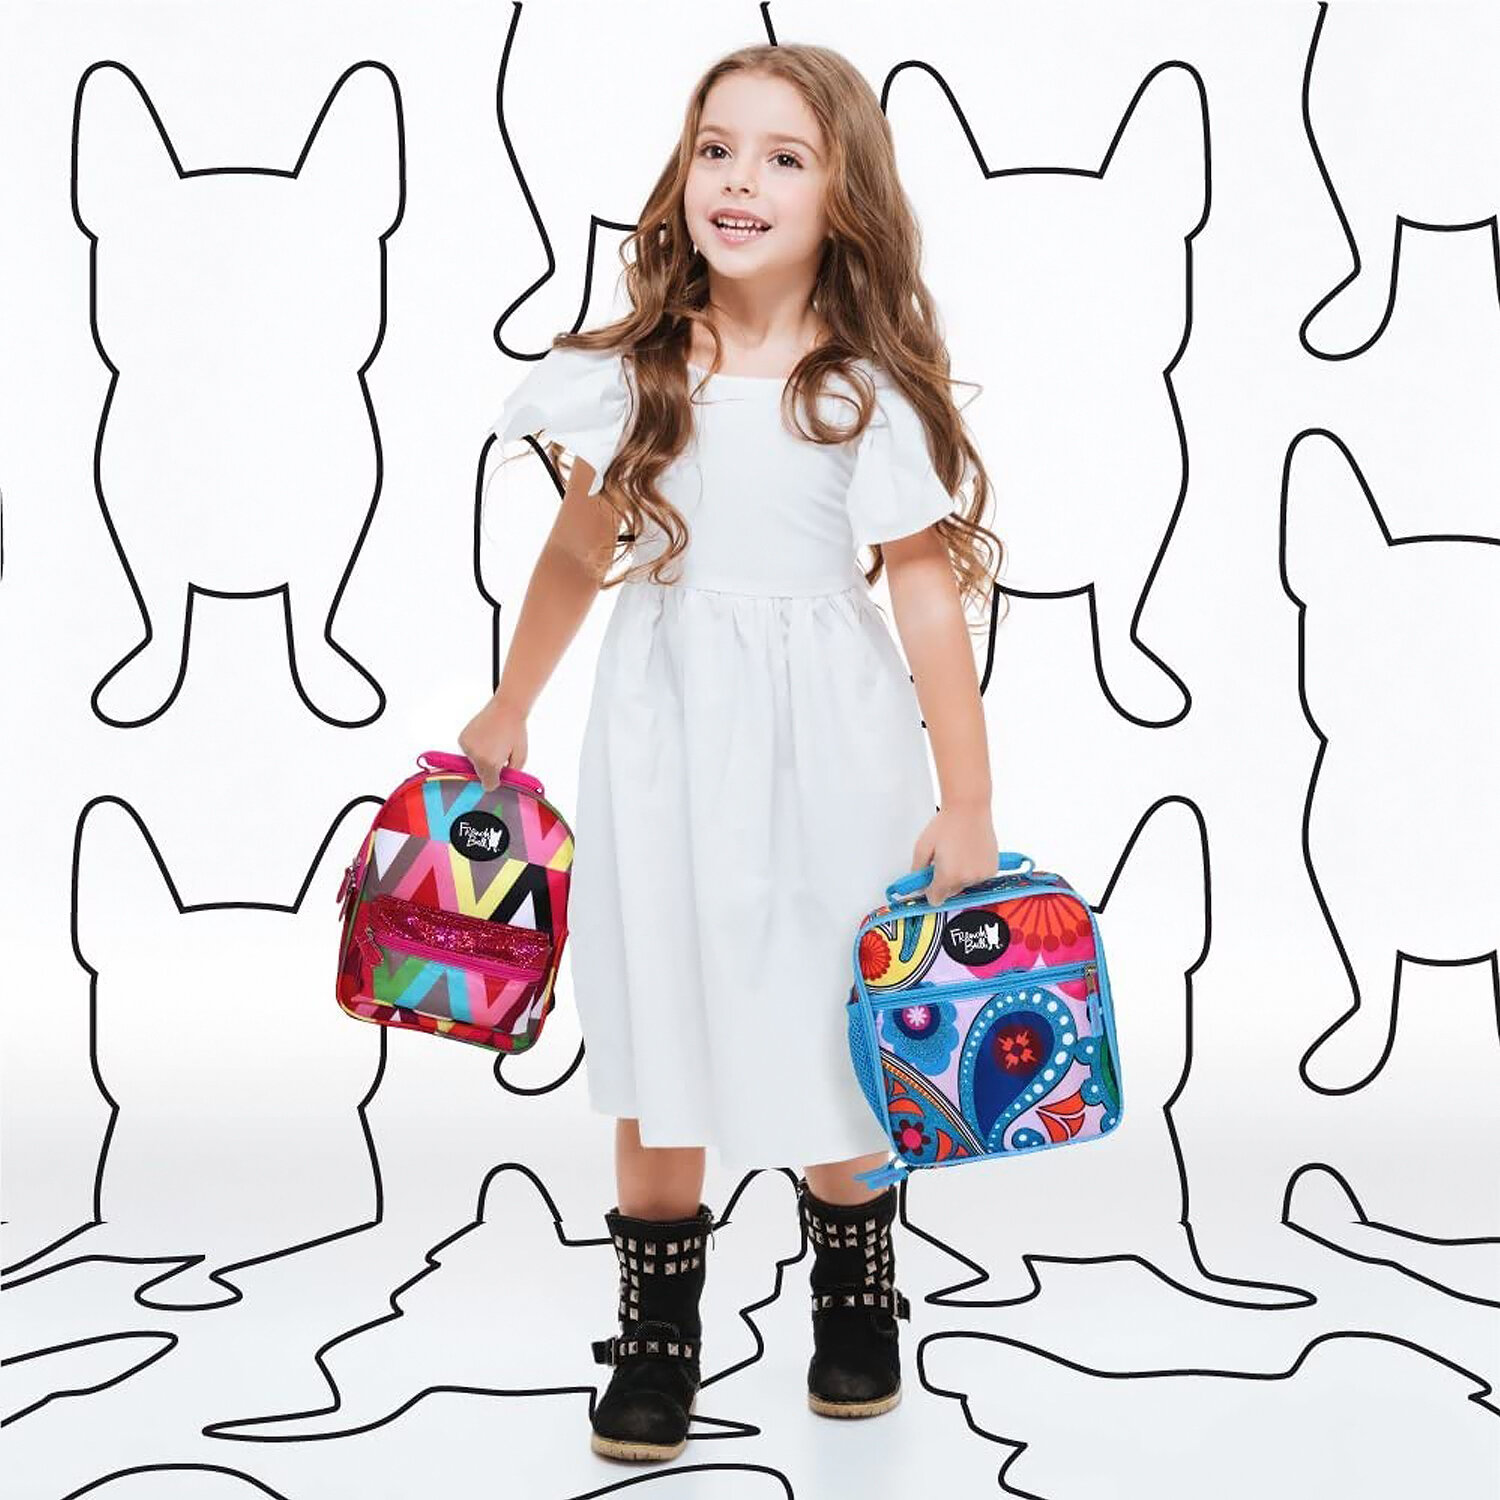  Composite image of French Bull kid’s lunch bags, pattern background and stock image using Photoshop and Illustrator 